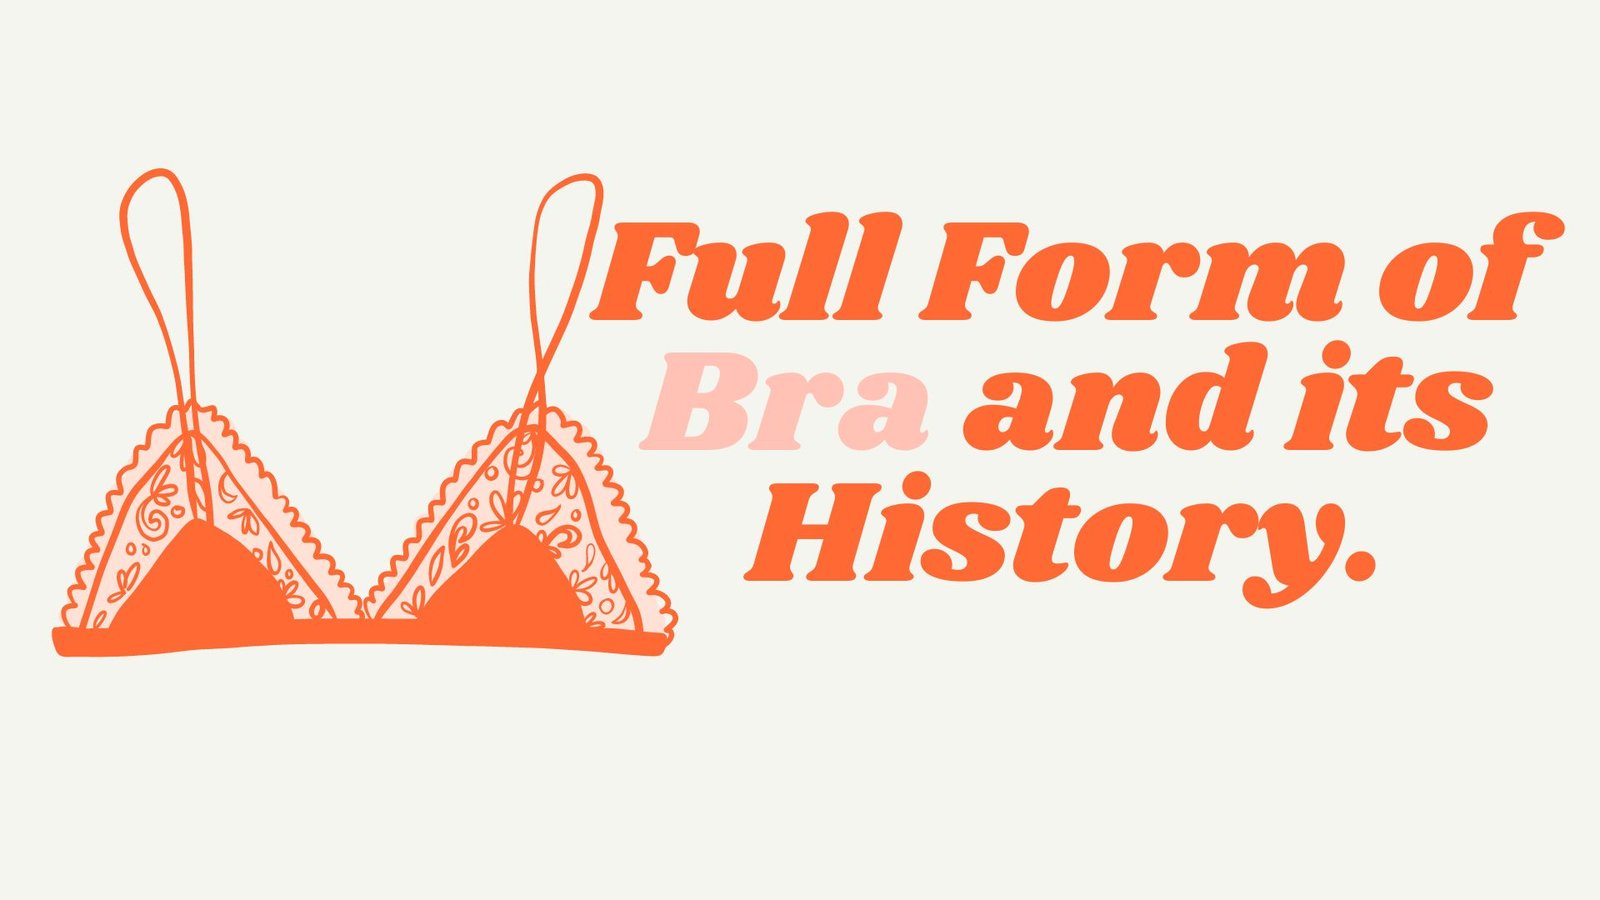 You are currently viewing Full Form of Bra and its History